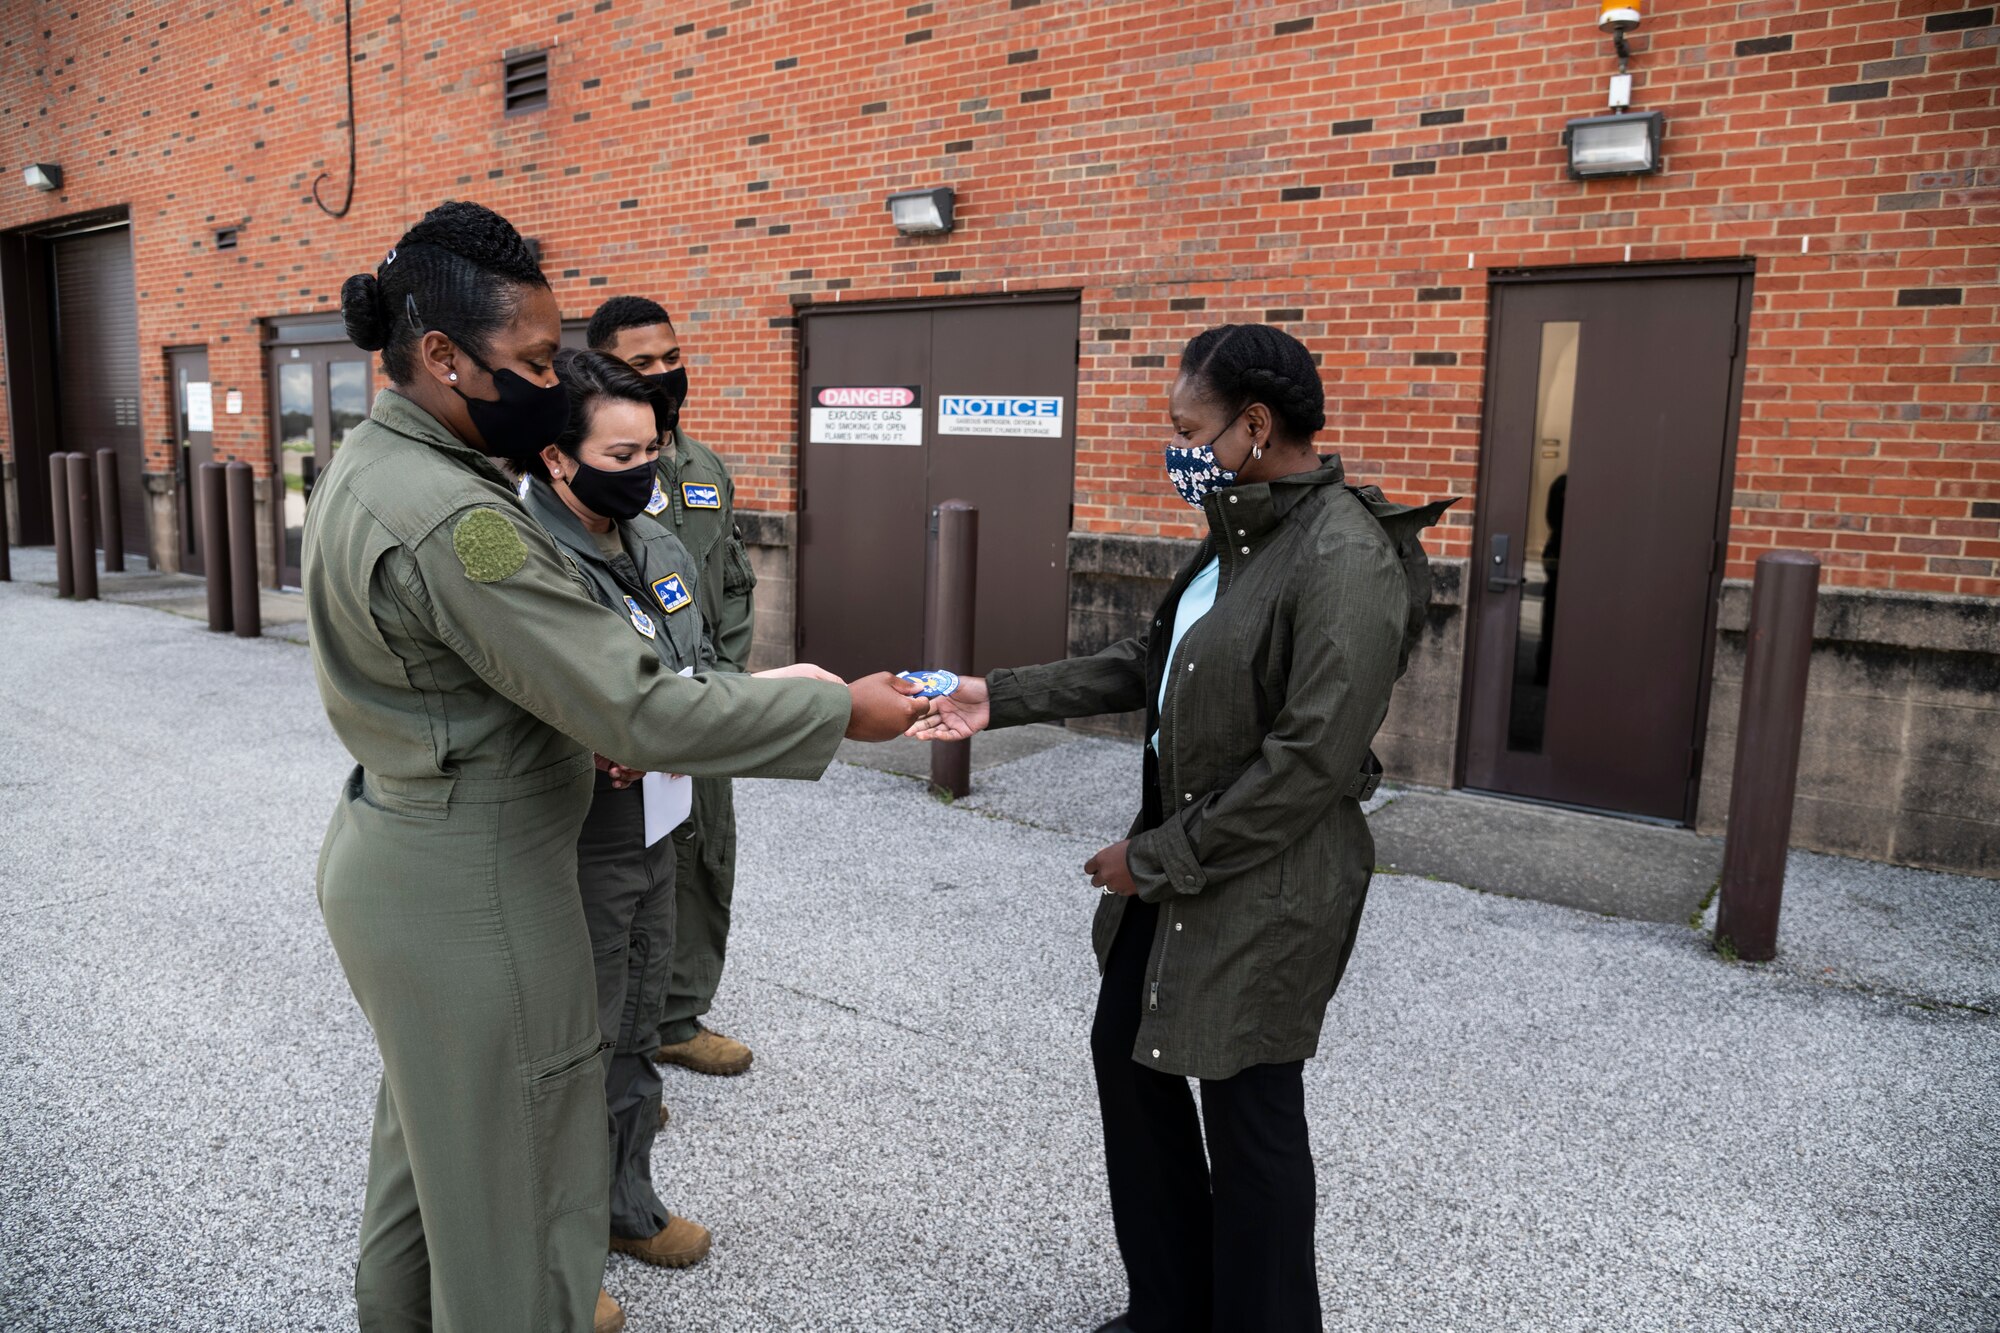 U.S. Air Force Chief Master Sgt. Monica Codner, 73 Airlift Squadron, superintendent, and Senior Master Sgt. Brenda Rodriguez, 54 Airlift Squadron, give their unit patches to Mrs. Kareen Kruzelnick, Air Force spouse, during a tour of the 932nd Airlift Wing at Scott Air Force Base, Illinois, April 10, 2021. Mrs. Kruzelnick  joined her husband, Chief Master Sgt. Brian Kruzelnick, Air Mobility Command command chief, on a tour of the 932nd Airlift Wing. (U.S. Air Force photo by Senior Airman Brooke Spenner)